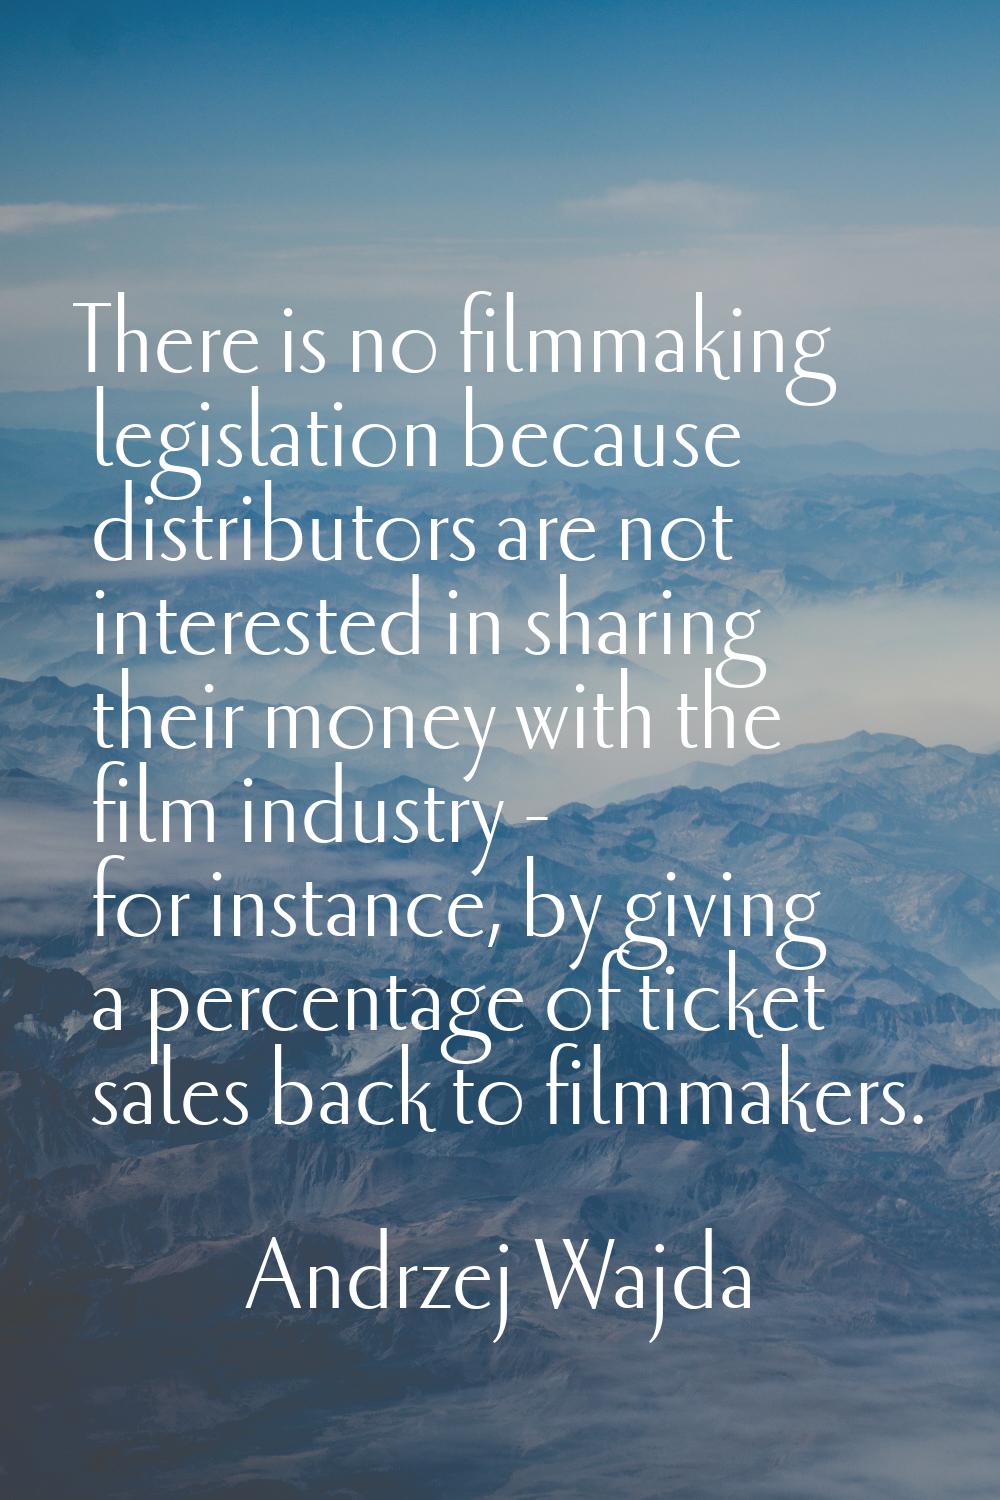 There is no filmmaking legislation because distributors are not interested in sharing their money w